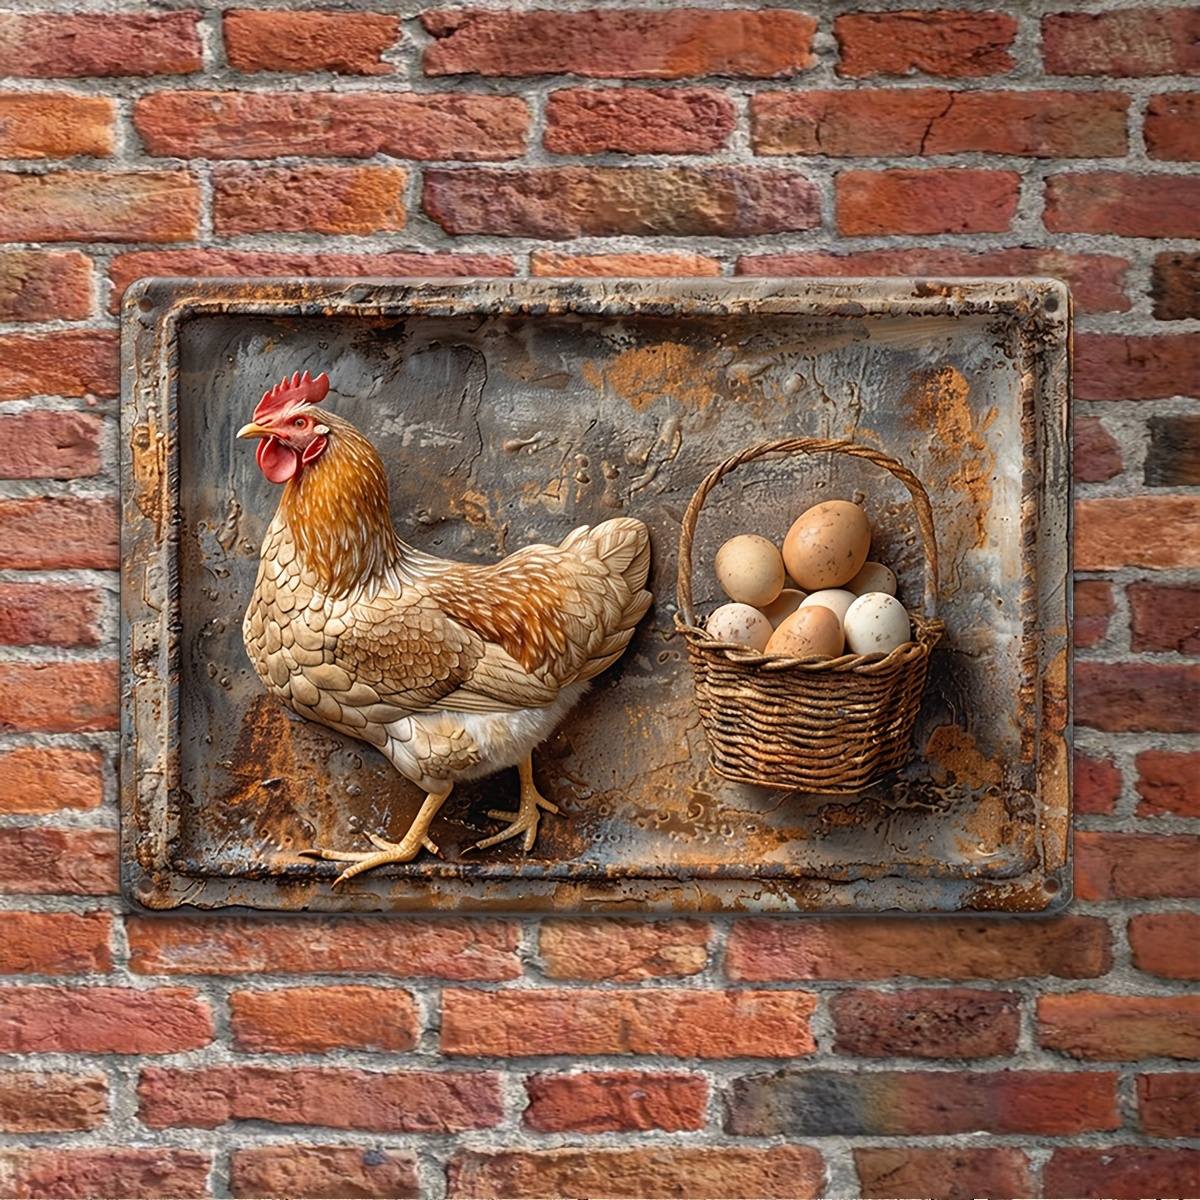 

Rustic Chicken & Fresh Eggs Metal Sign - Vintage Aluminum Wall Decor For Farmhouse Kitchen, Garage, Porch, Cafe, Bar, For Man Cave - 12"x8" Country Style Home Accent